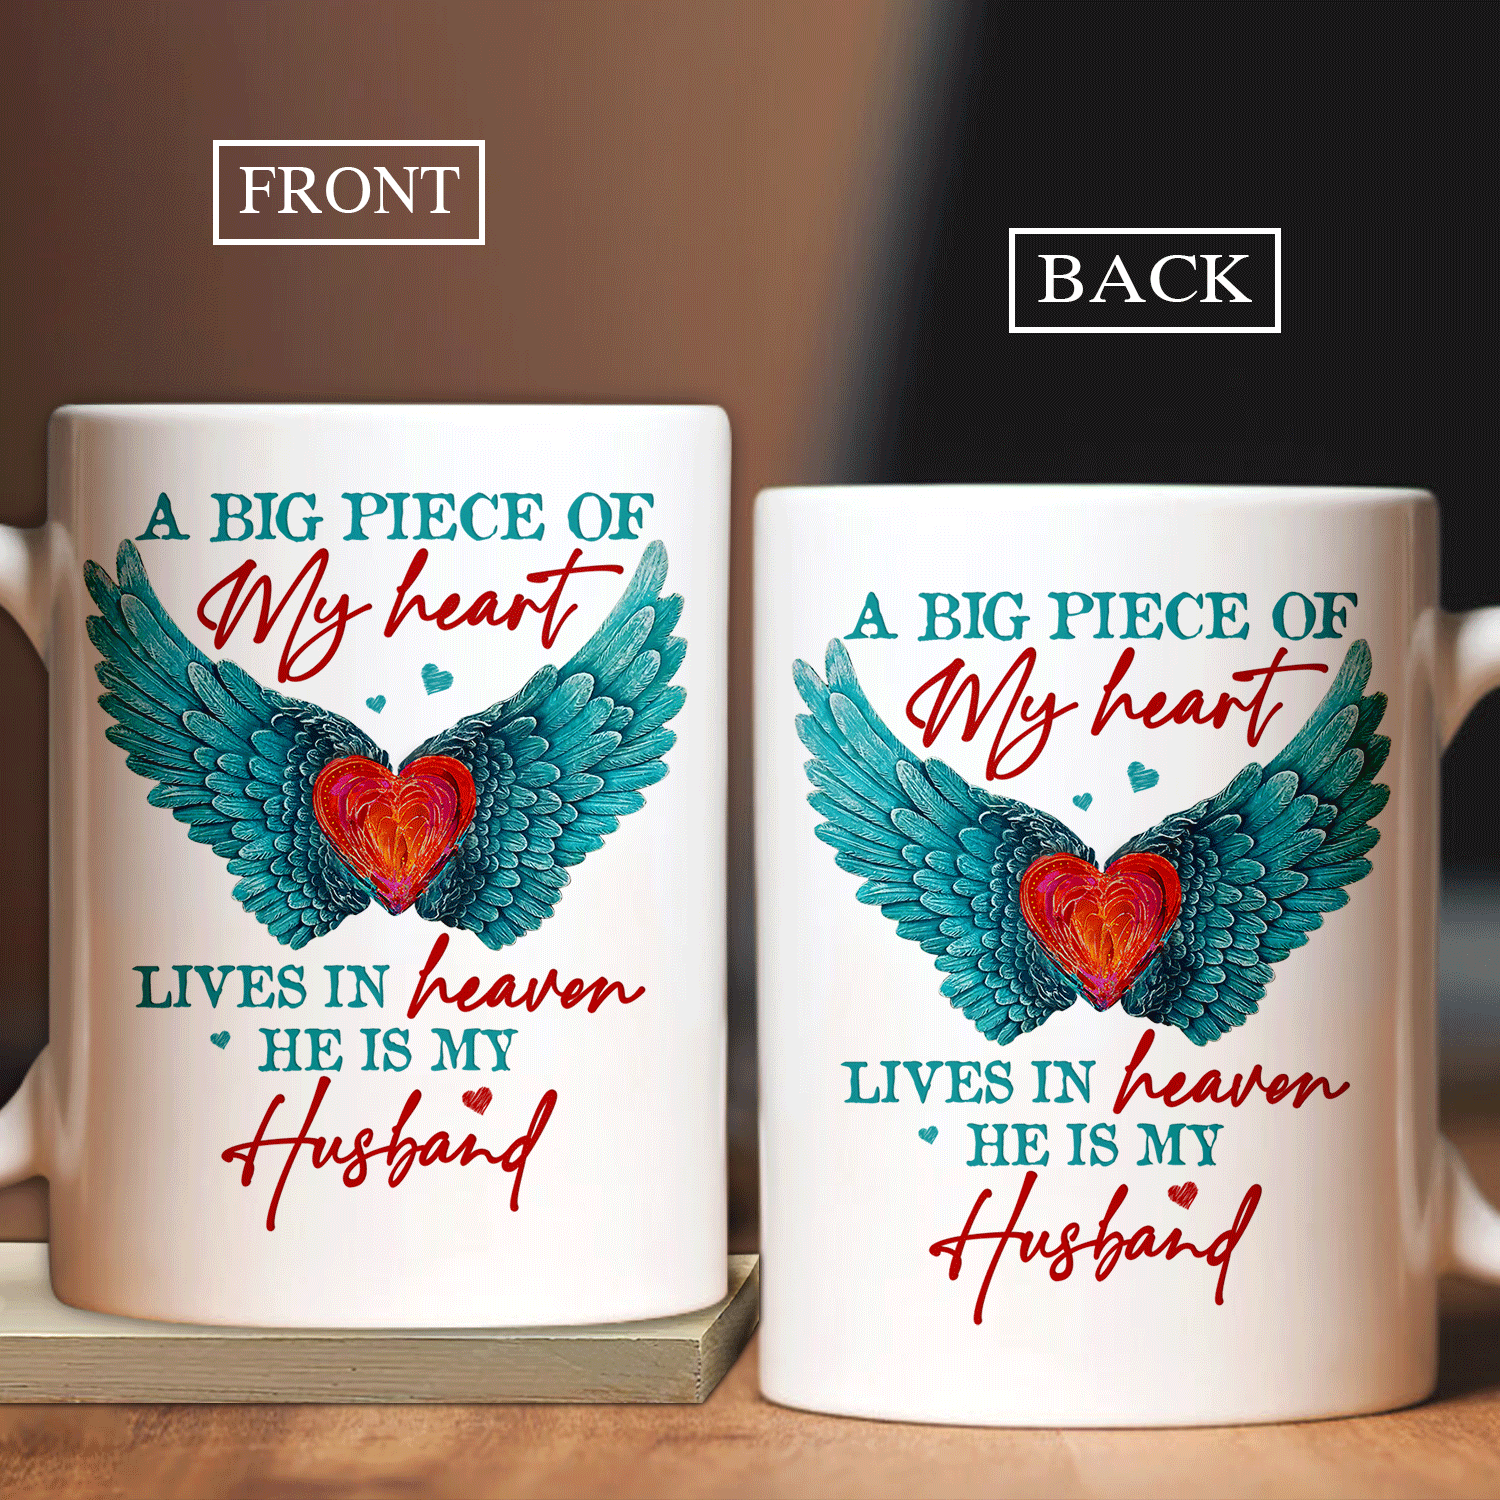 Memorial White Mug - Blue angel wings, Red heart- Gift For Member Family - A big piece of my heart lives in heaven, He is my husband - Heaven White Mug